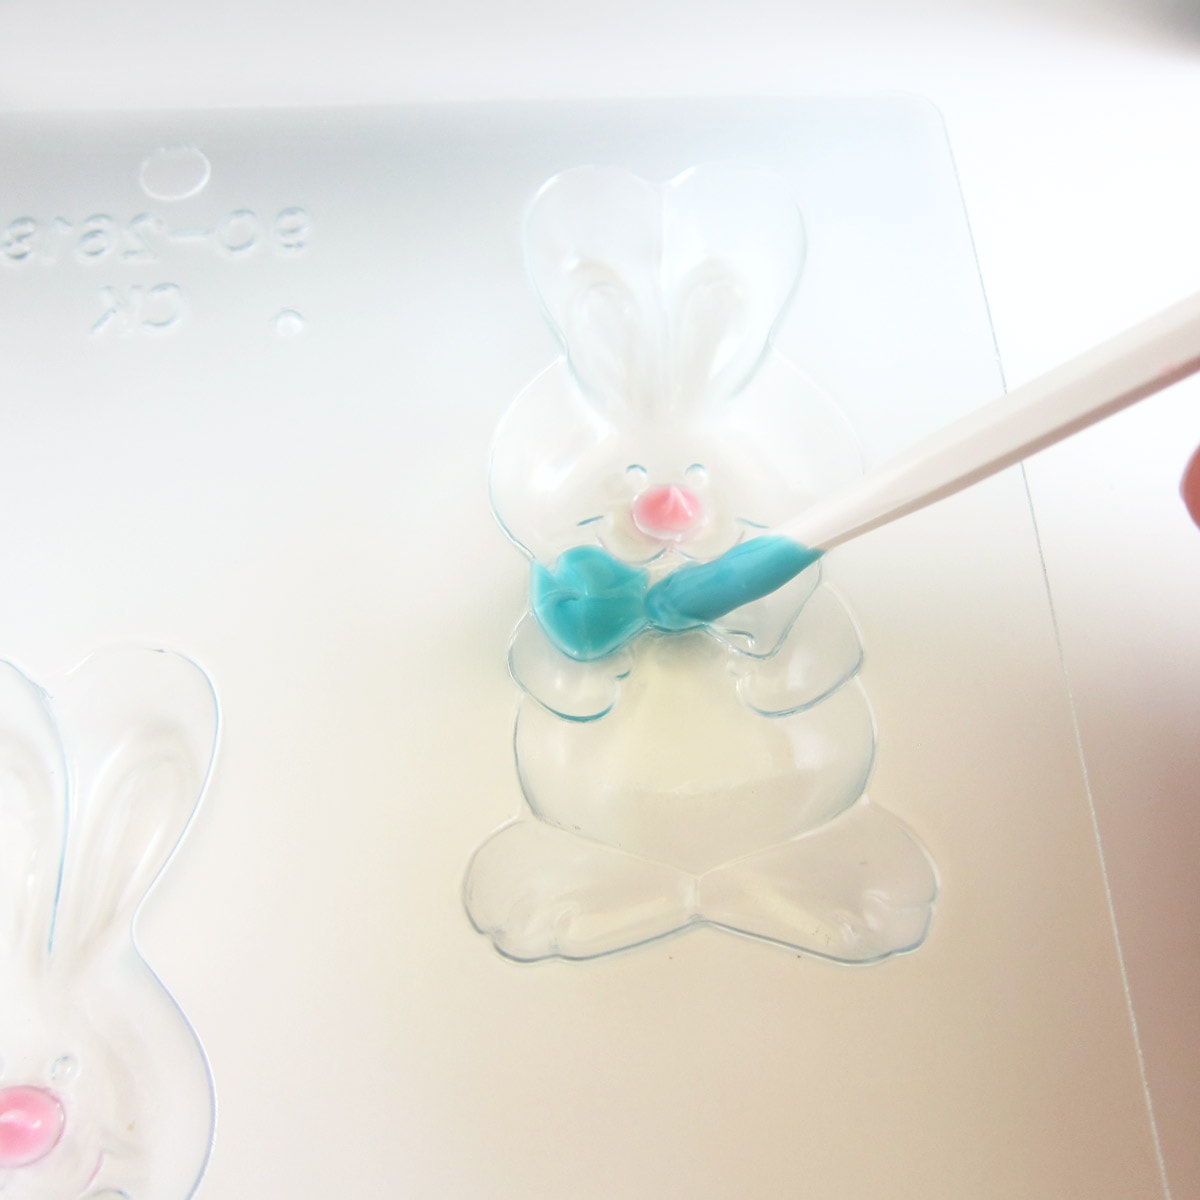 painting a blue bowtie in a bunny candy mold